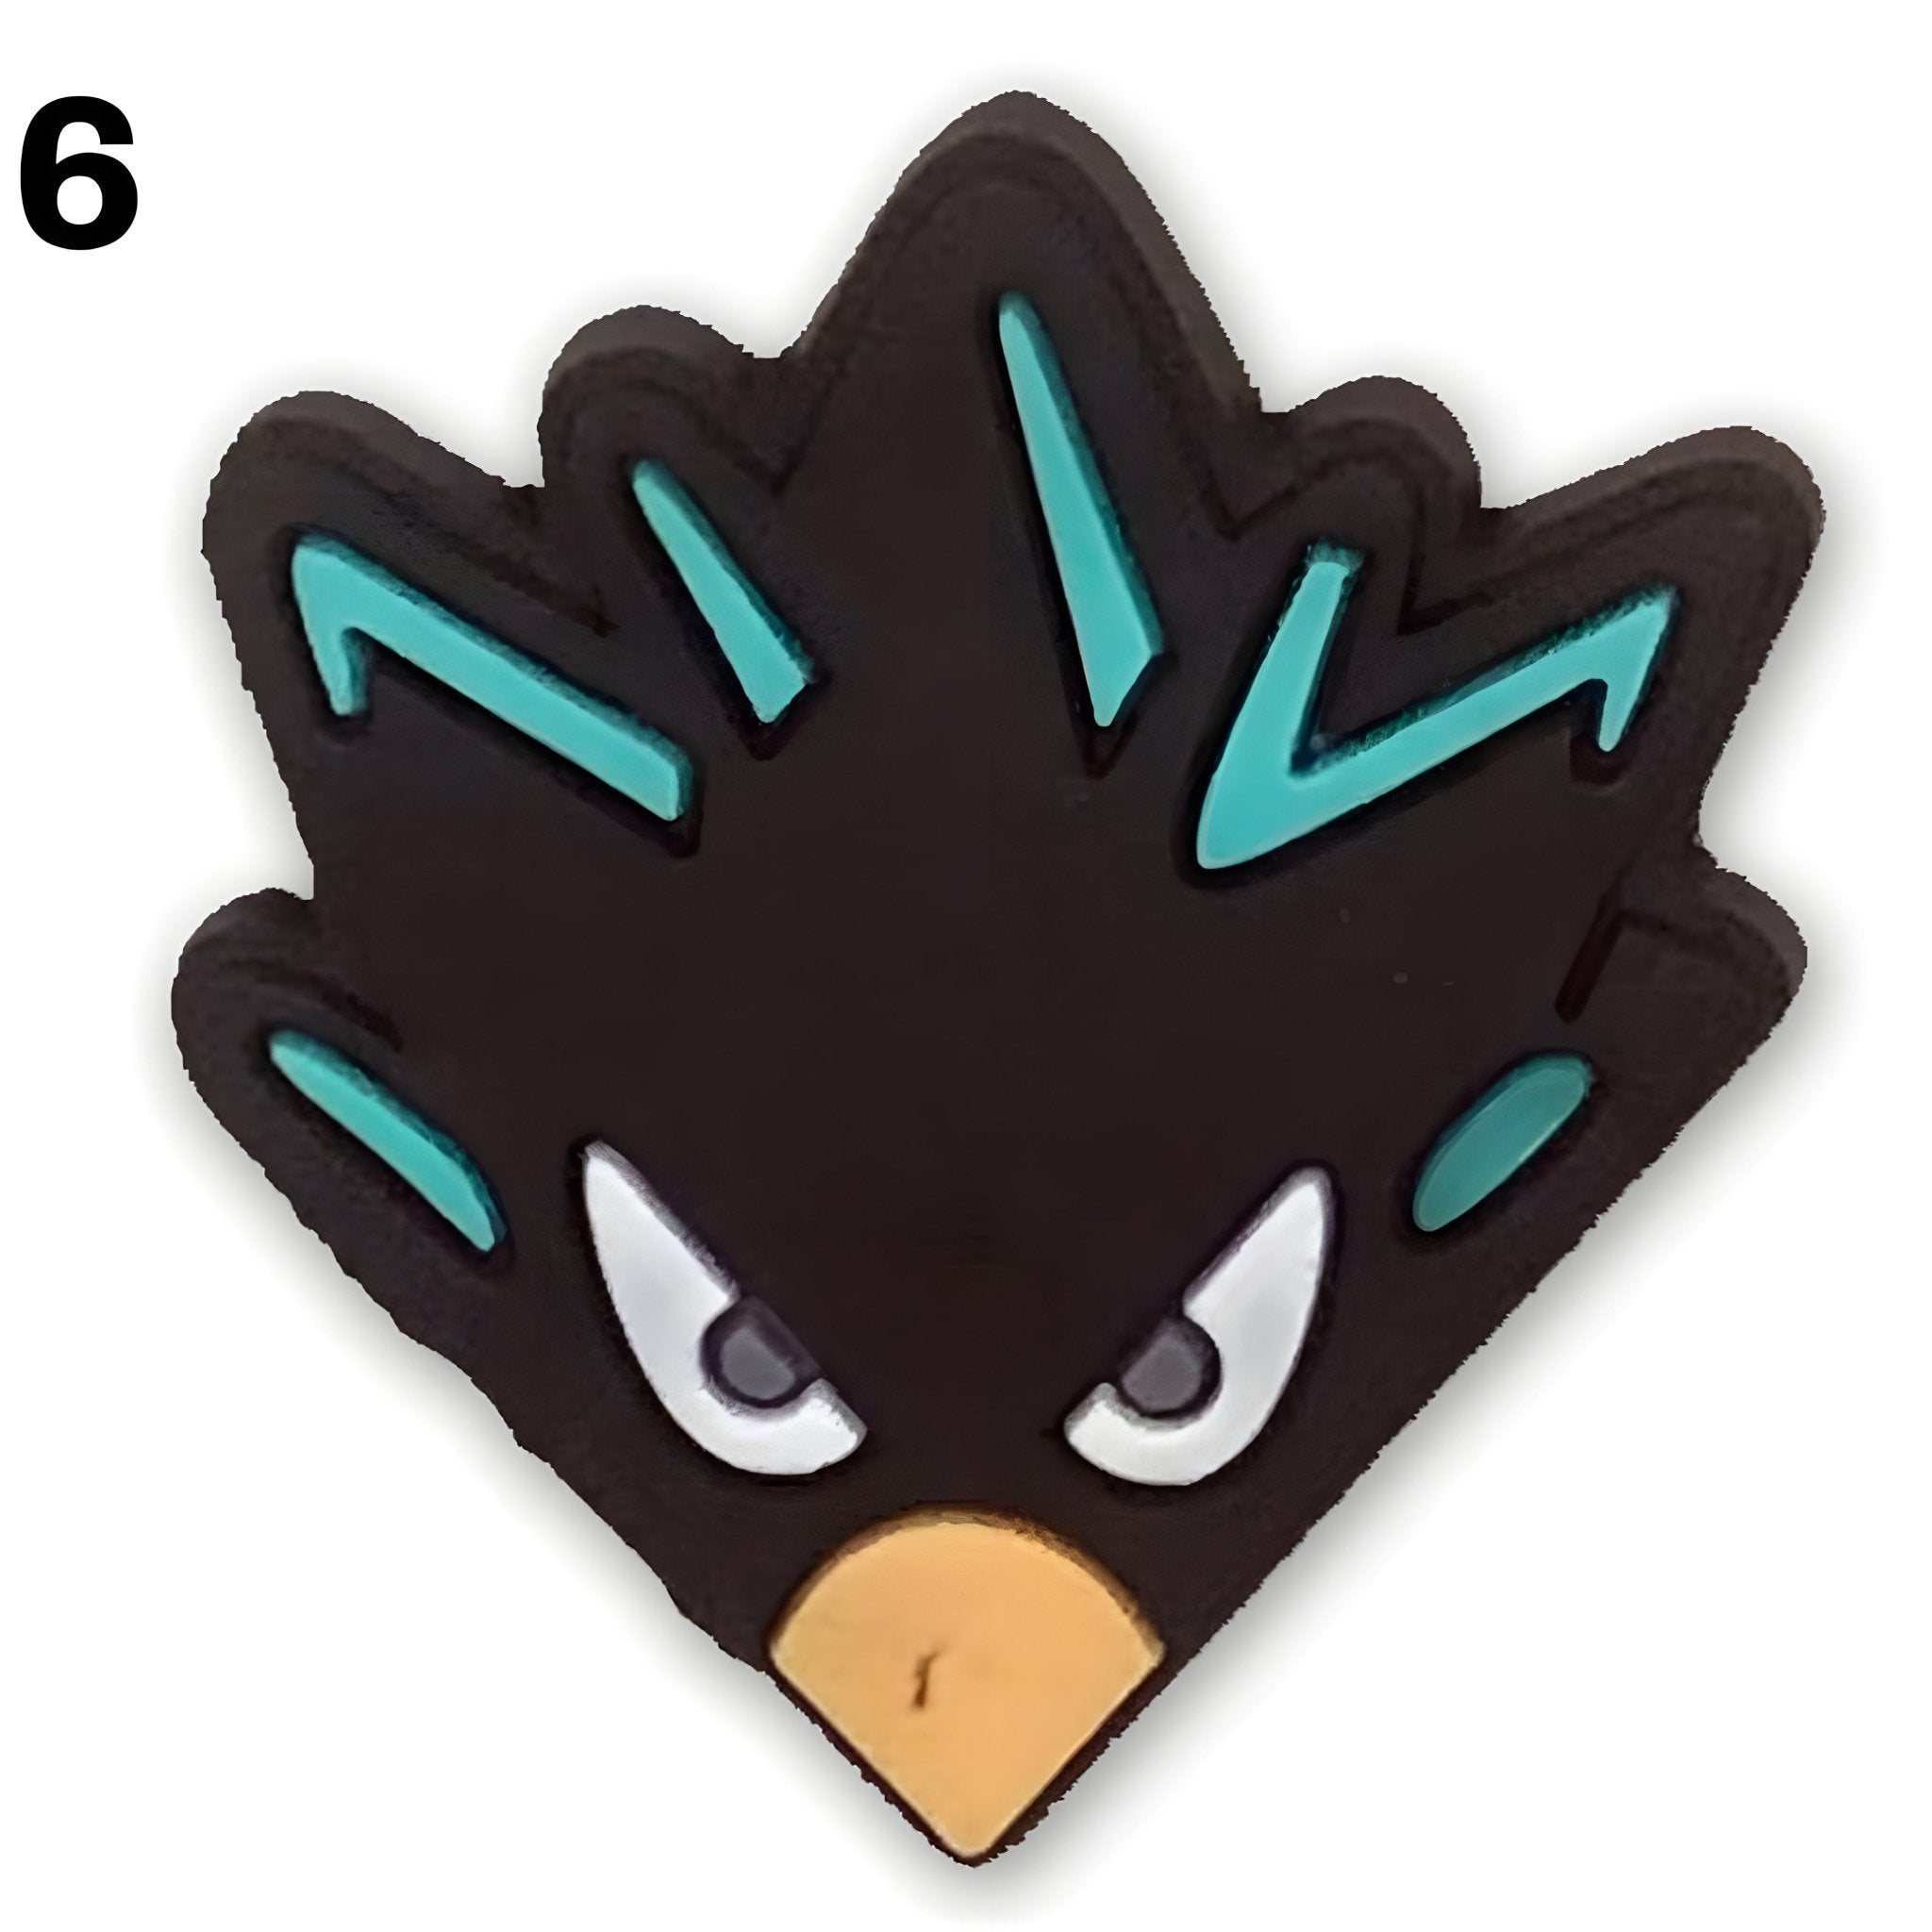 "Black Angry Bird Charm 🐦😡😄: Feathered Frustration!" - Questsole